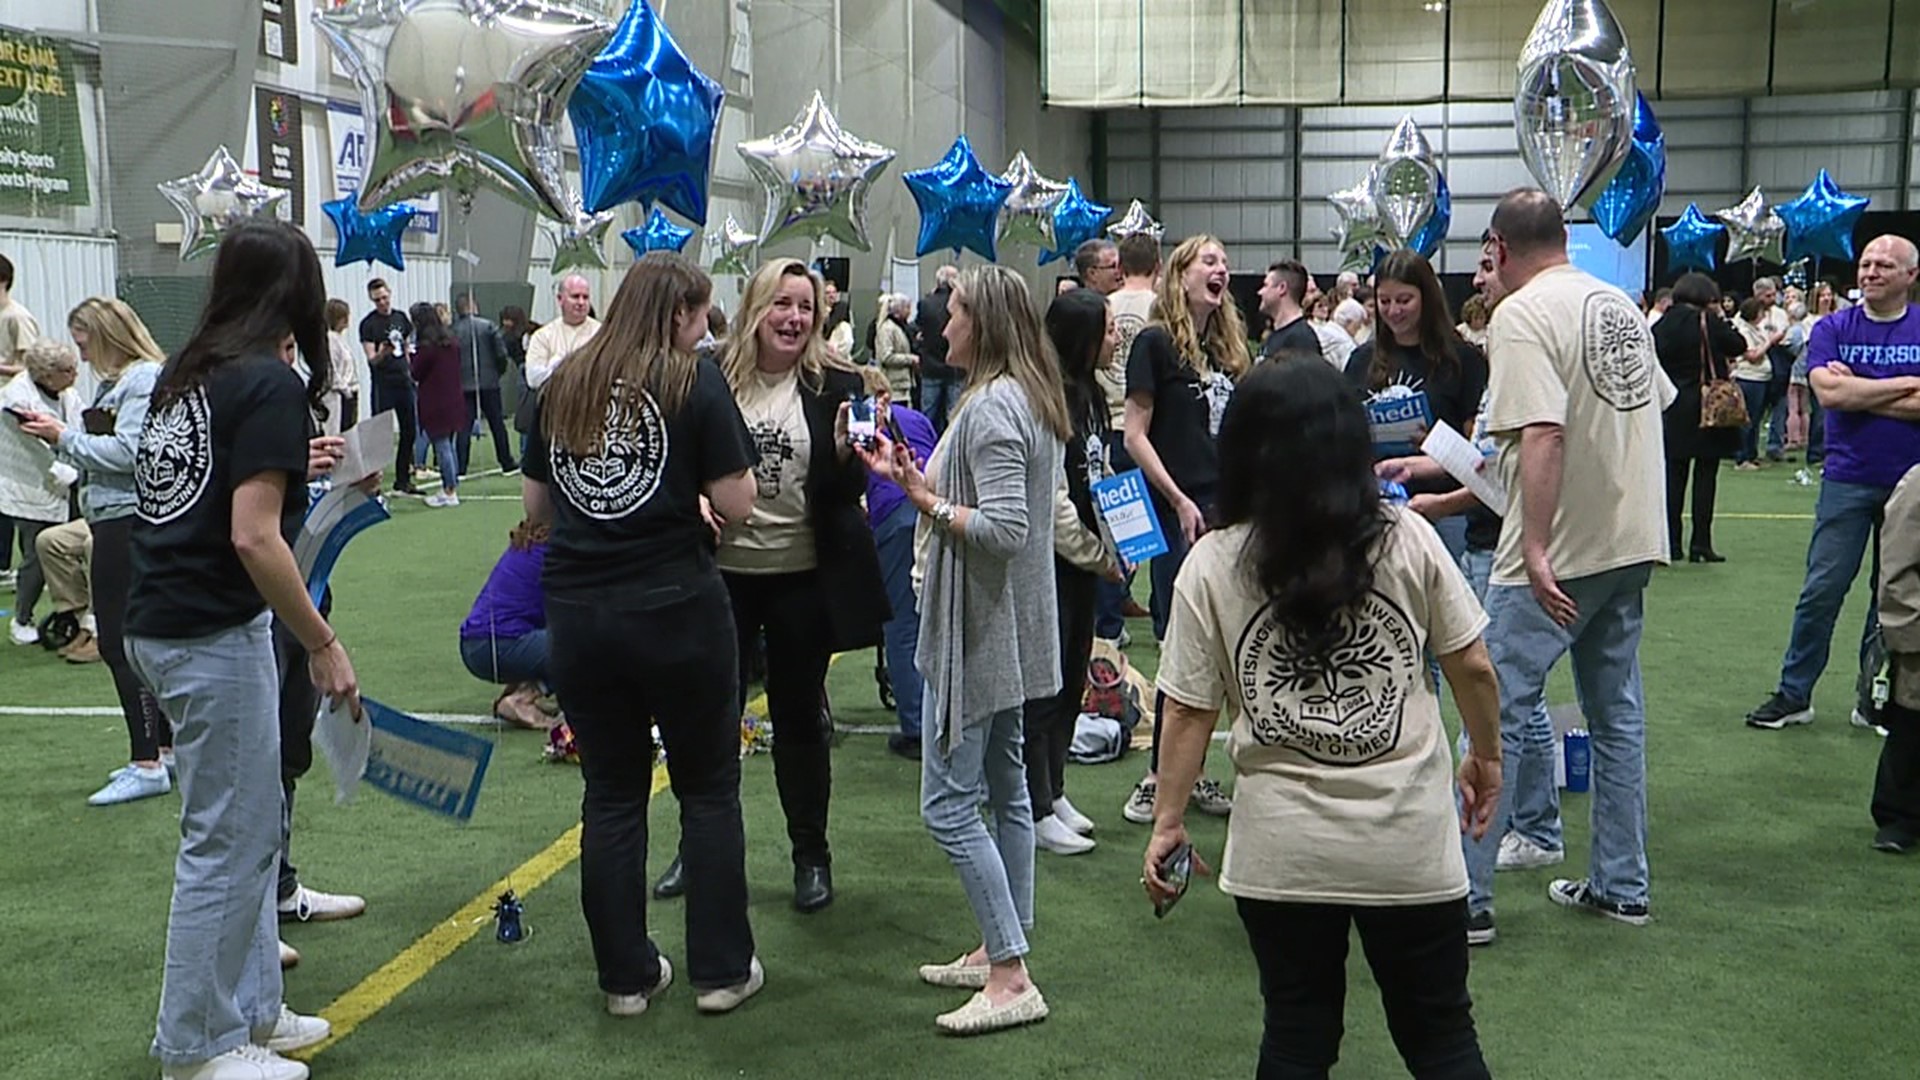 More than 100 medical students gathered Friday in Scranton, hoping for their top picks as they take the next step in their medical careers.